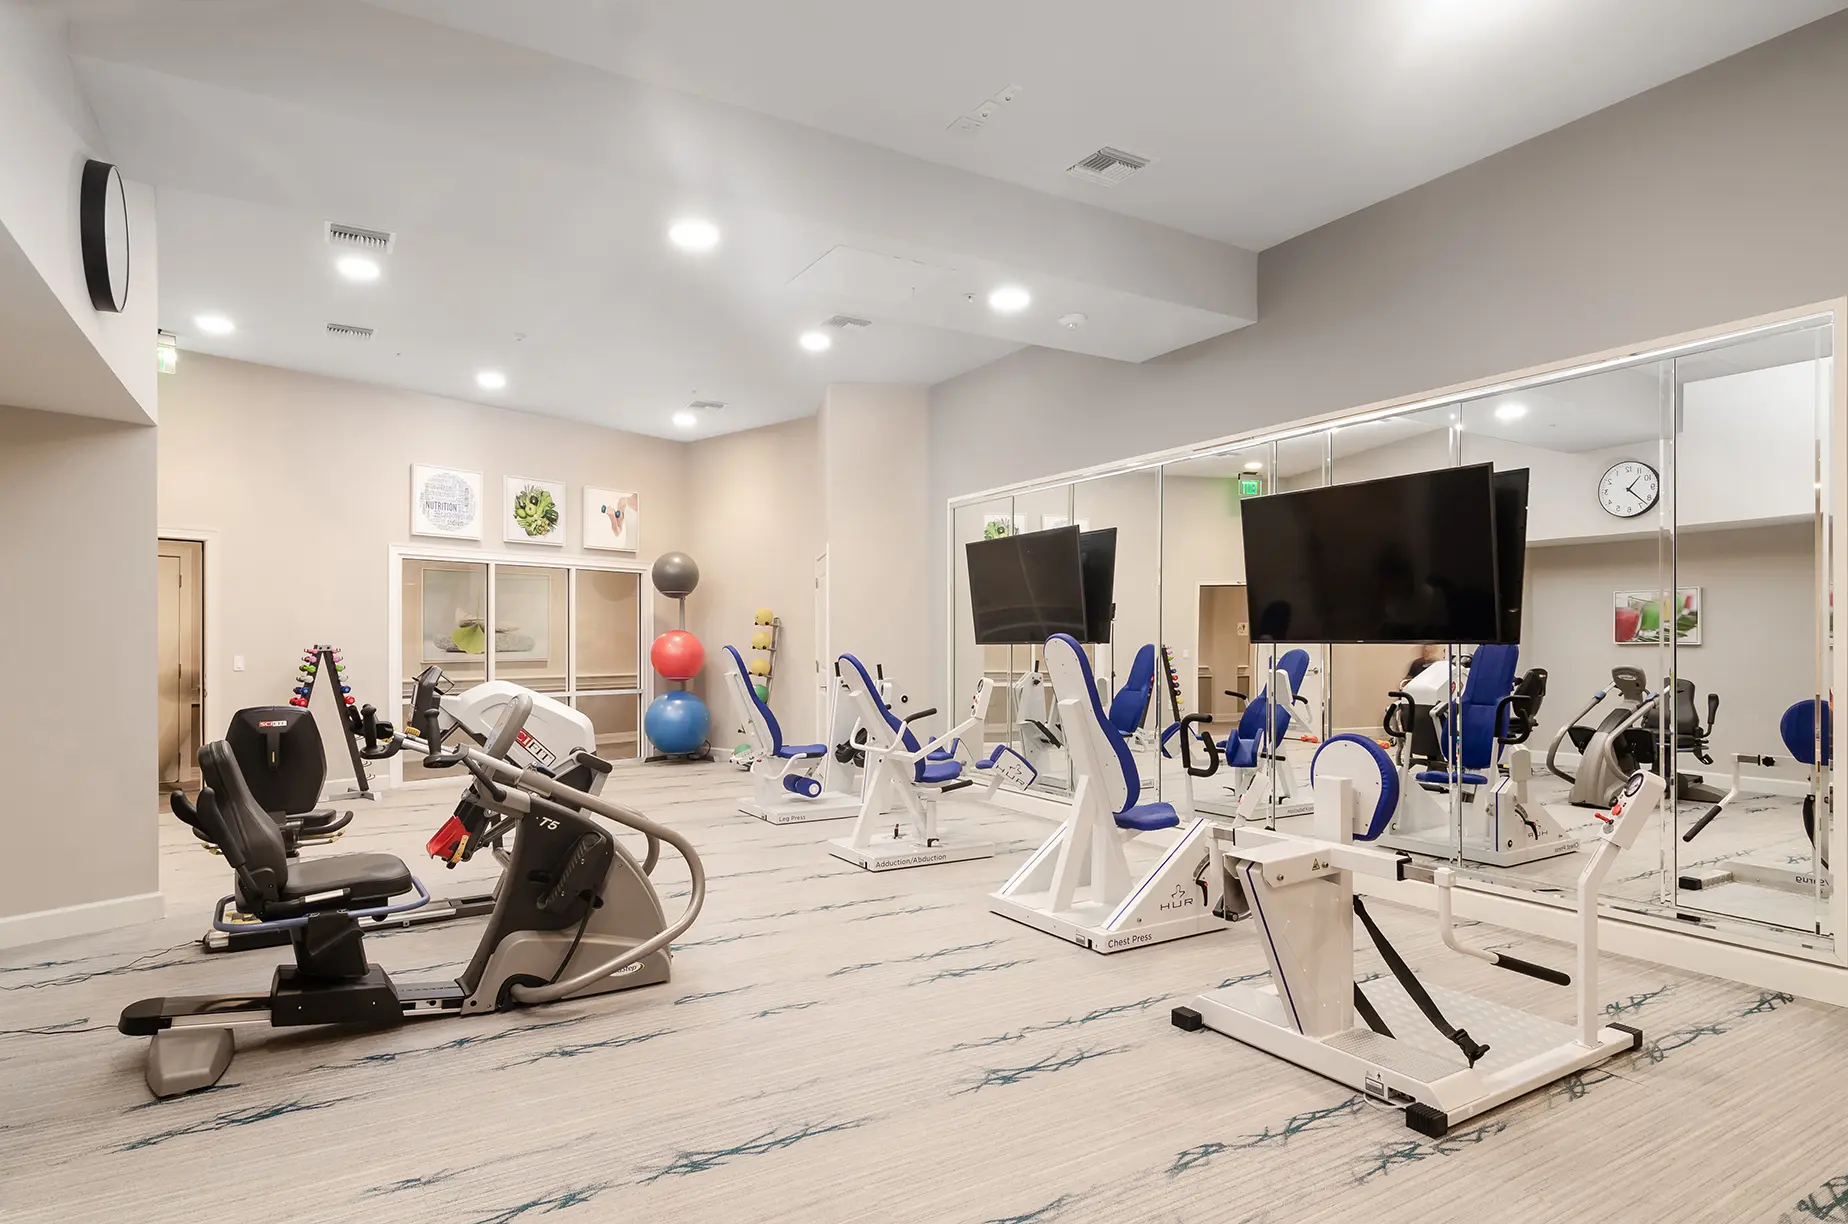 Fitness center at American House Fort Myers retirement community